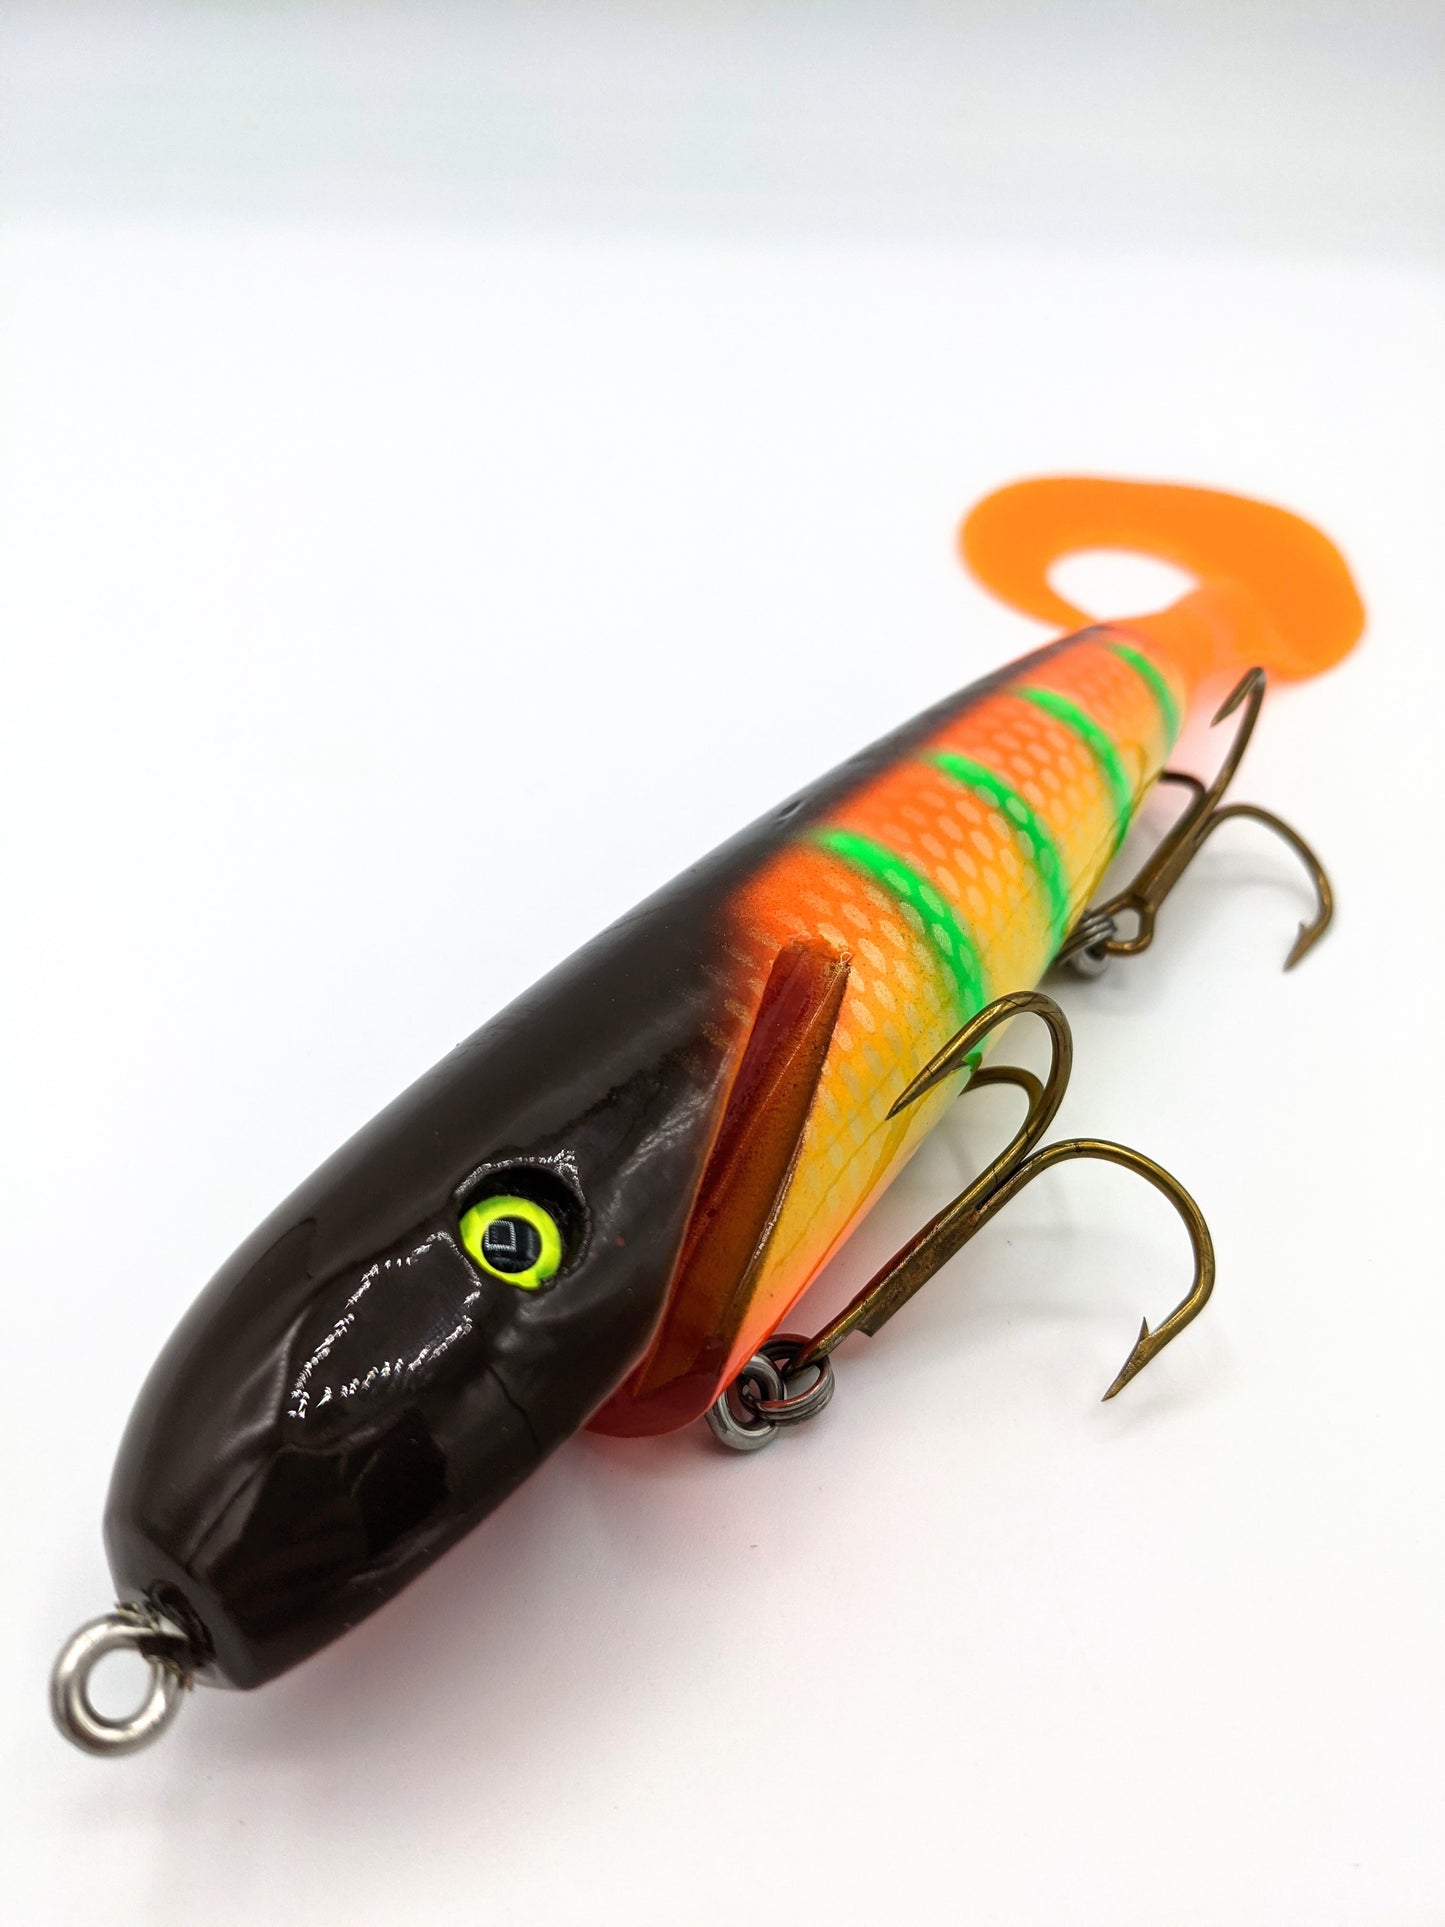 Leo Lures 6 Jerk/Rubber Tail, Rubber Musky Lures